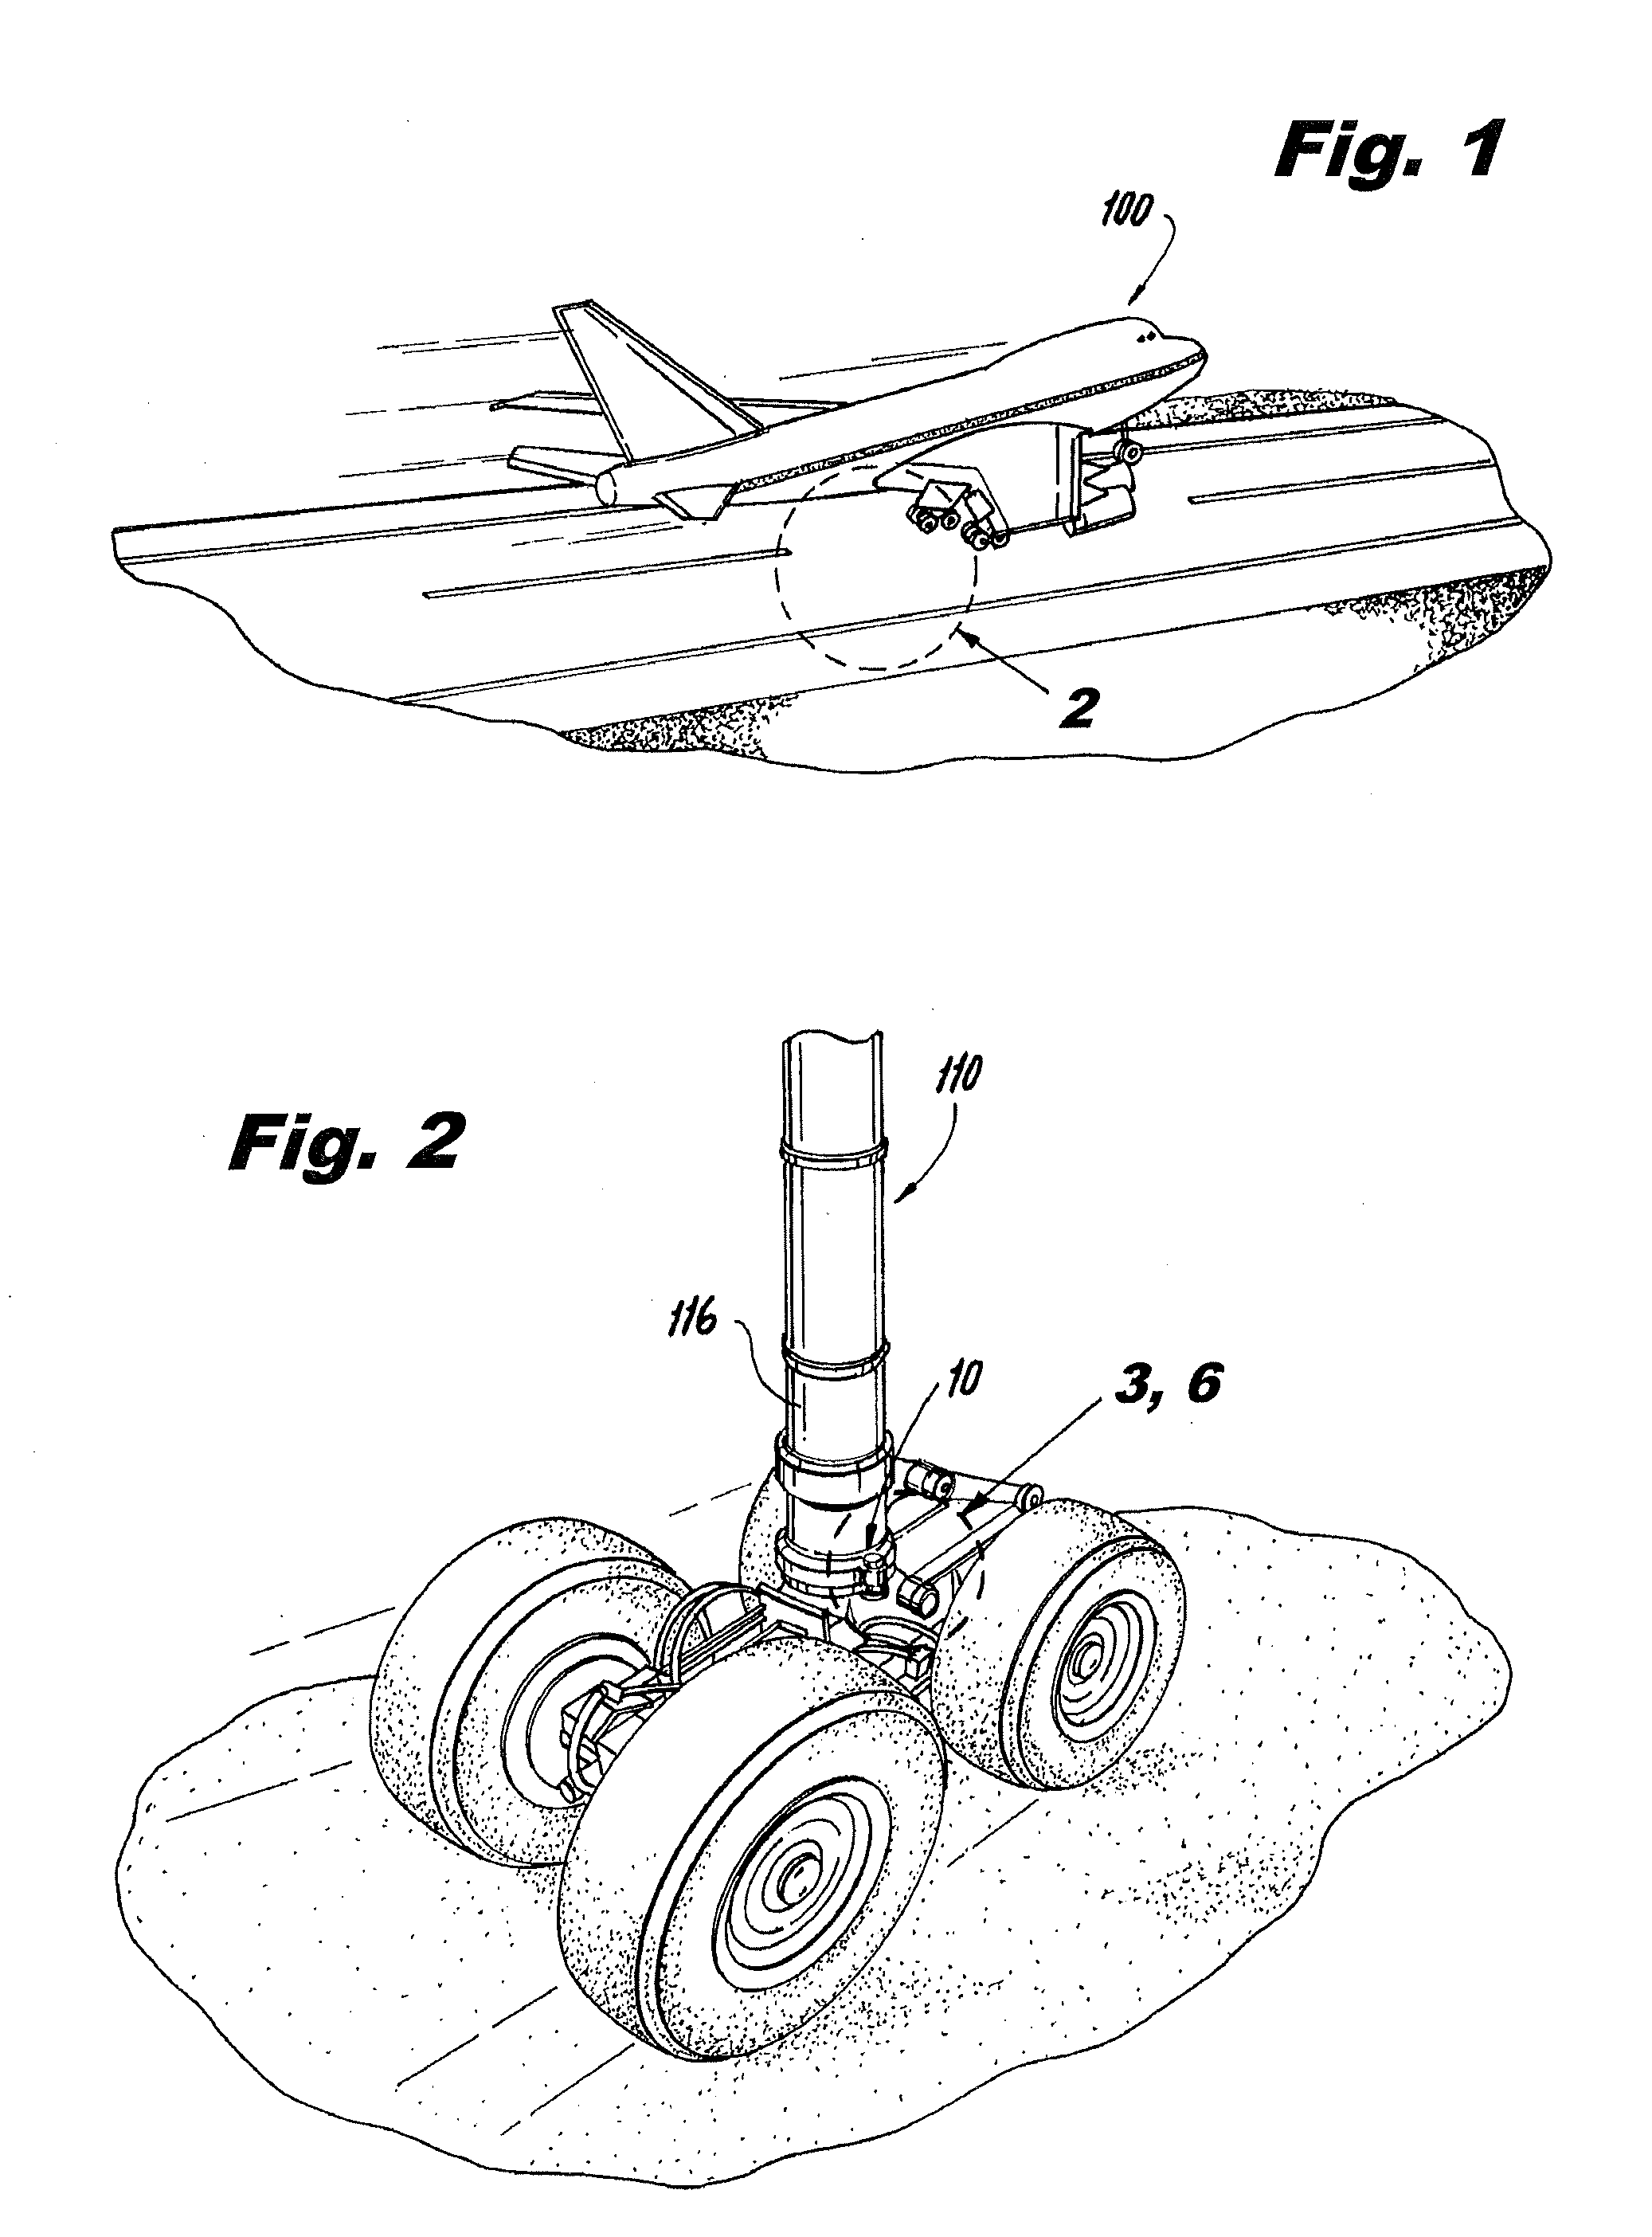 System for indicating an airplane hard landing